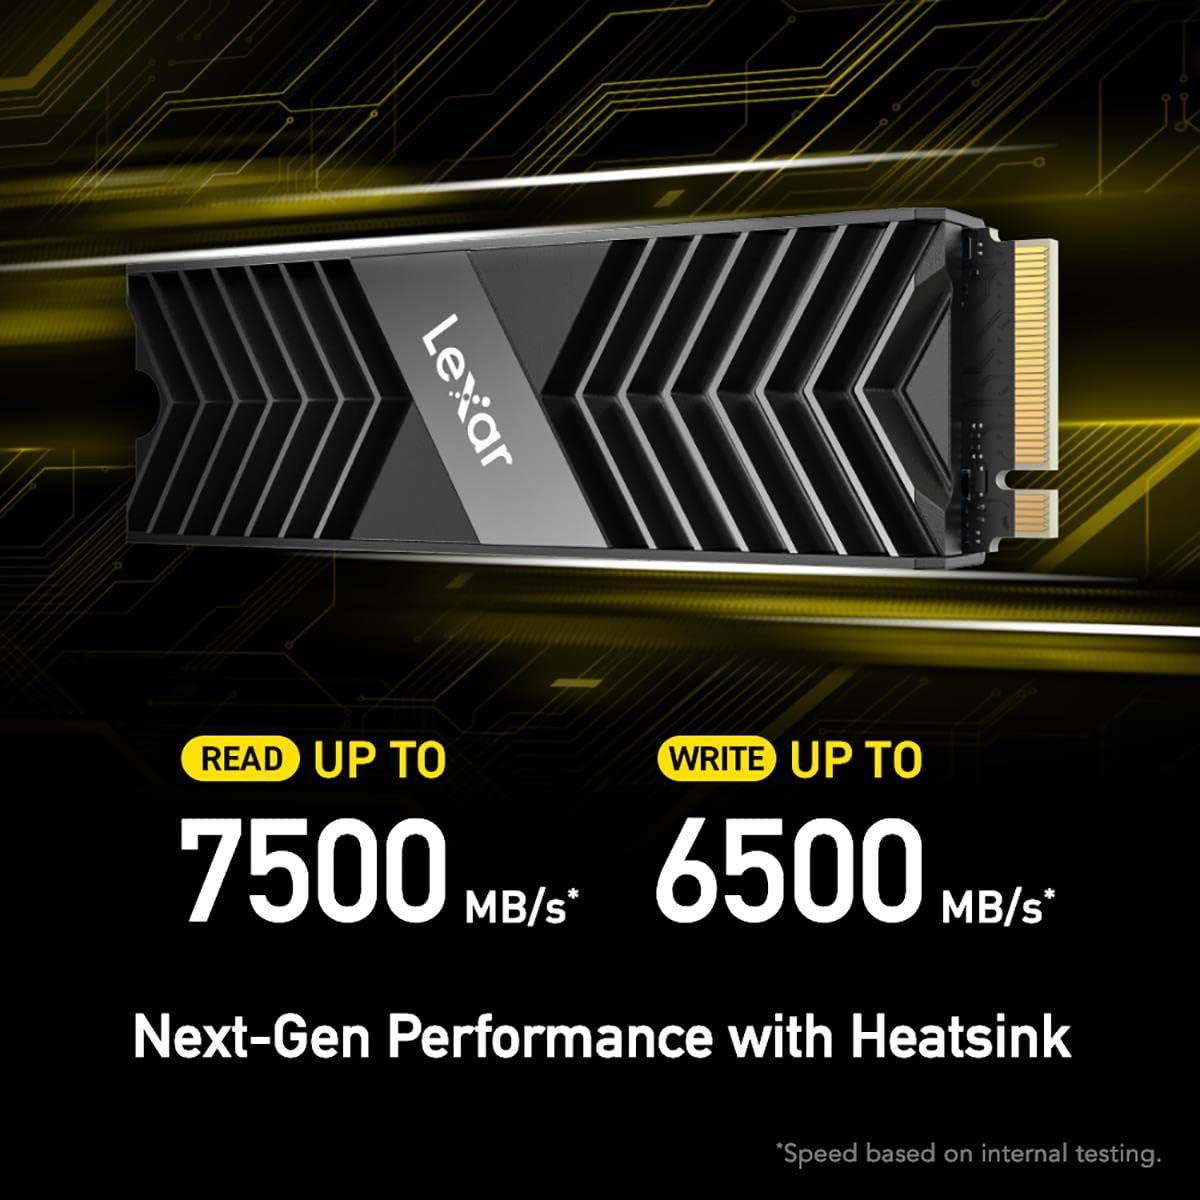 1TB Pro High Speed PCle Gen4 with 4 Lanes M.2 NvMe, Upto 7500Mb/s Read and 6300Mb/s Write